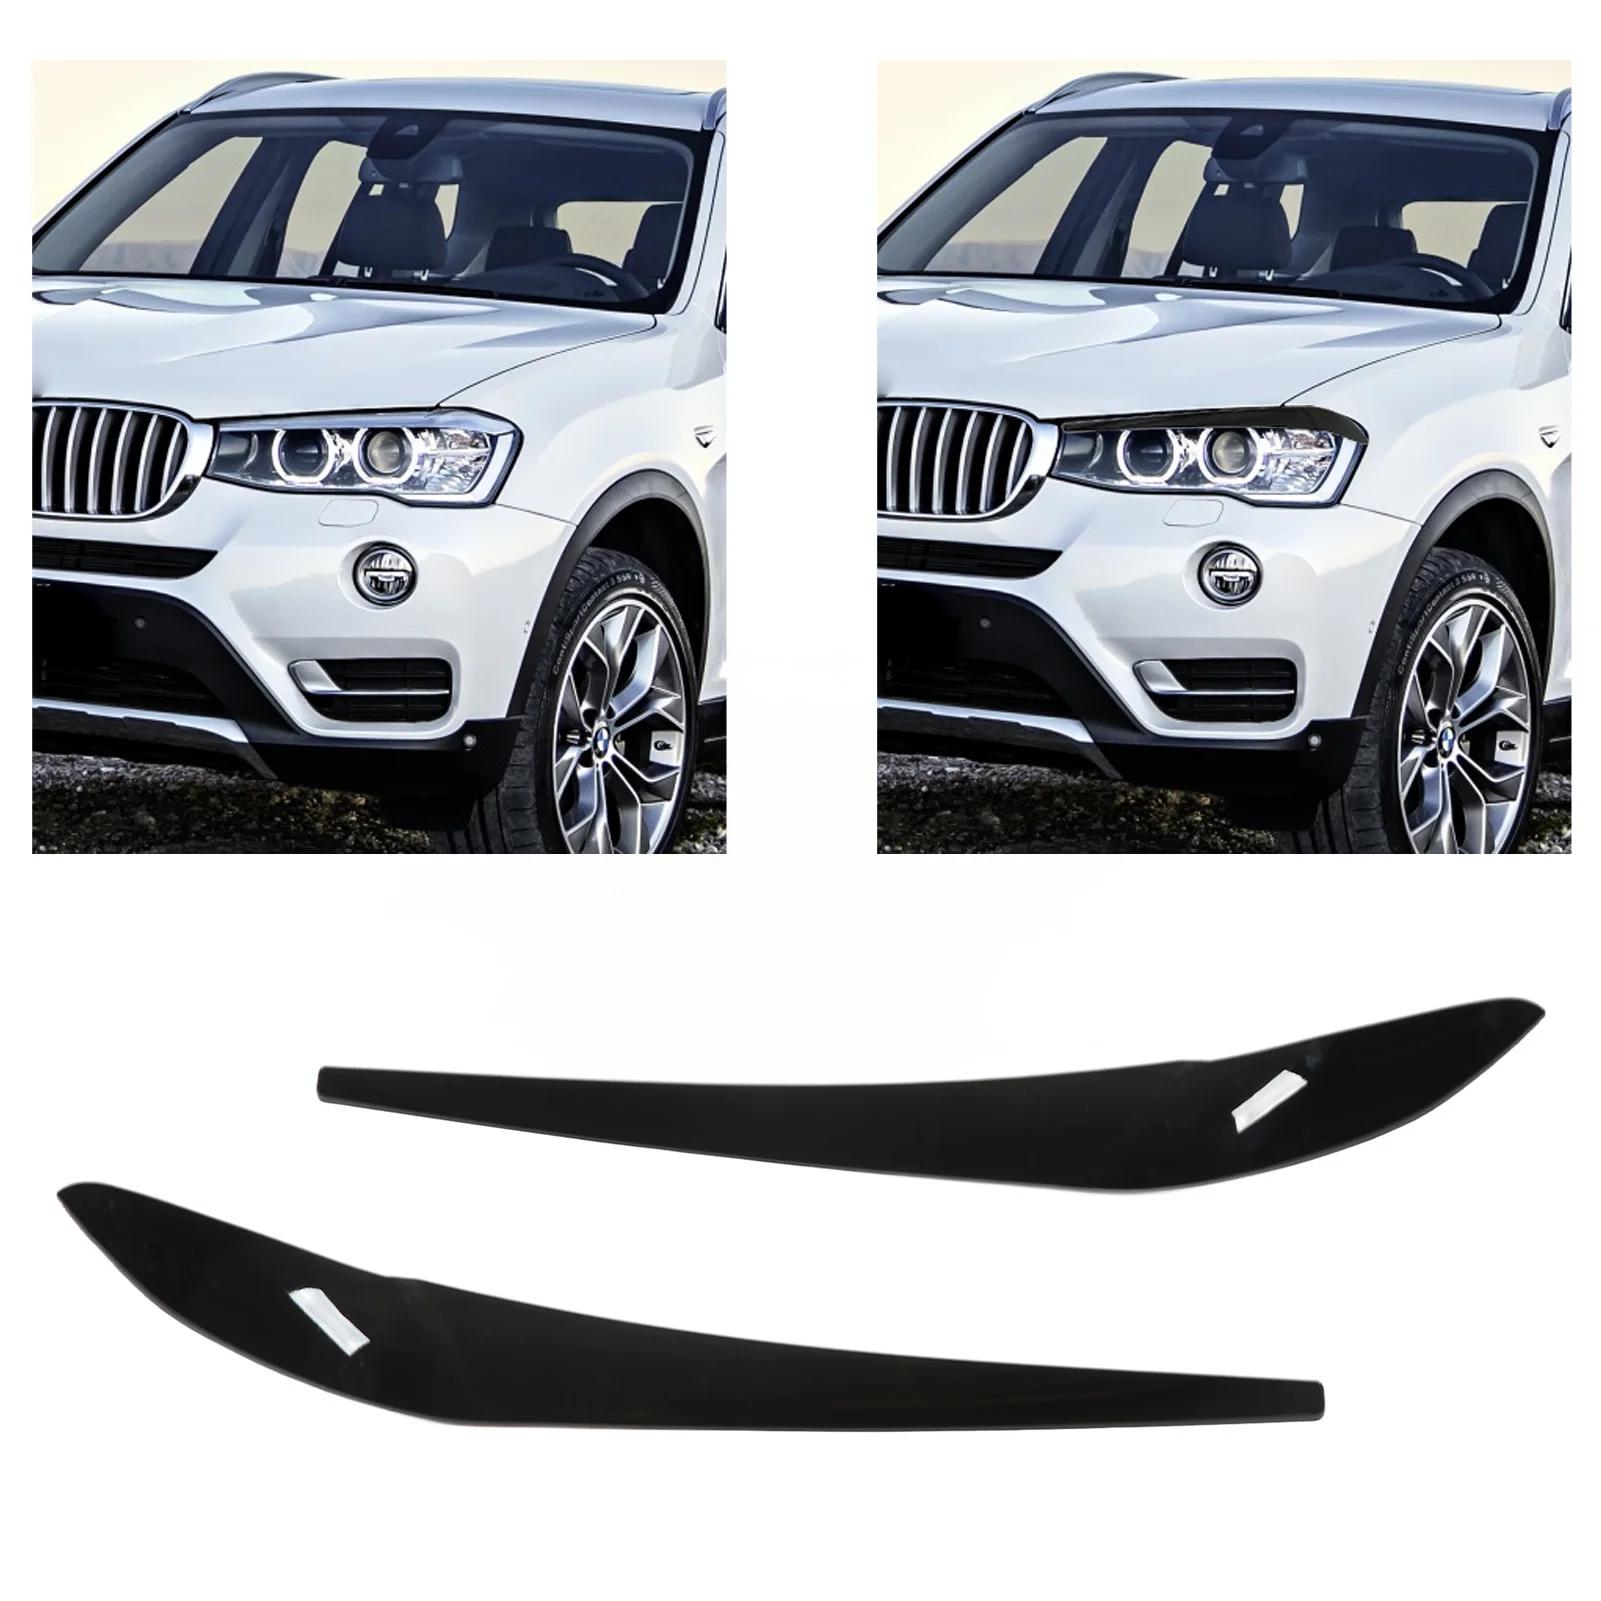 2pcs Headlight Eyebrow Eyelid Cover Trim Gloss Black Left Right Decorative Replacement for BMW X3 F25 X4 F26 2014-20